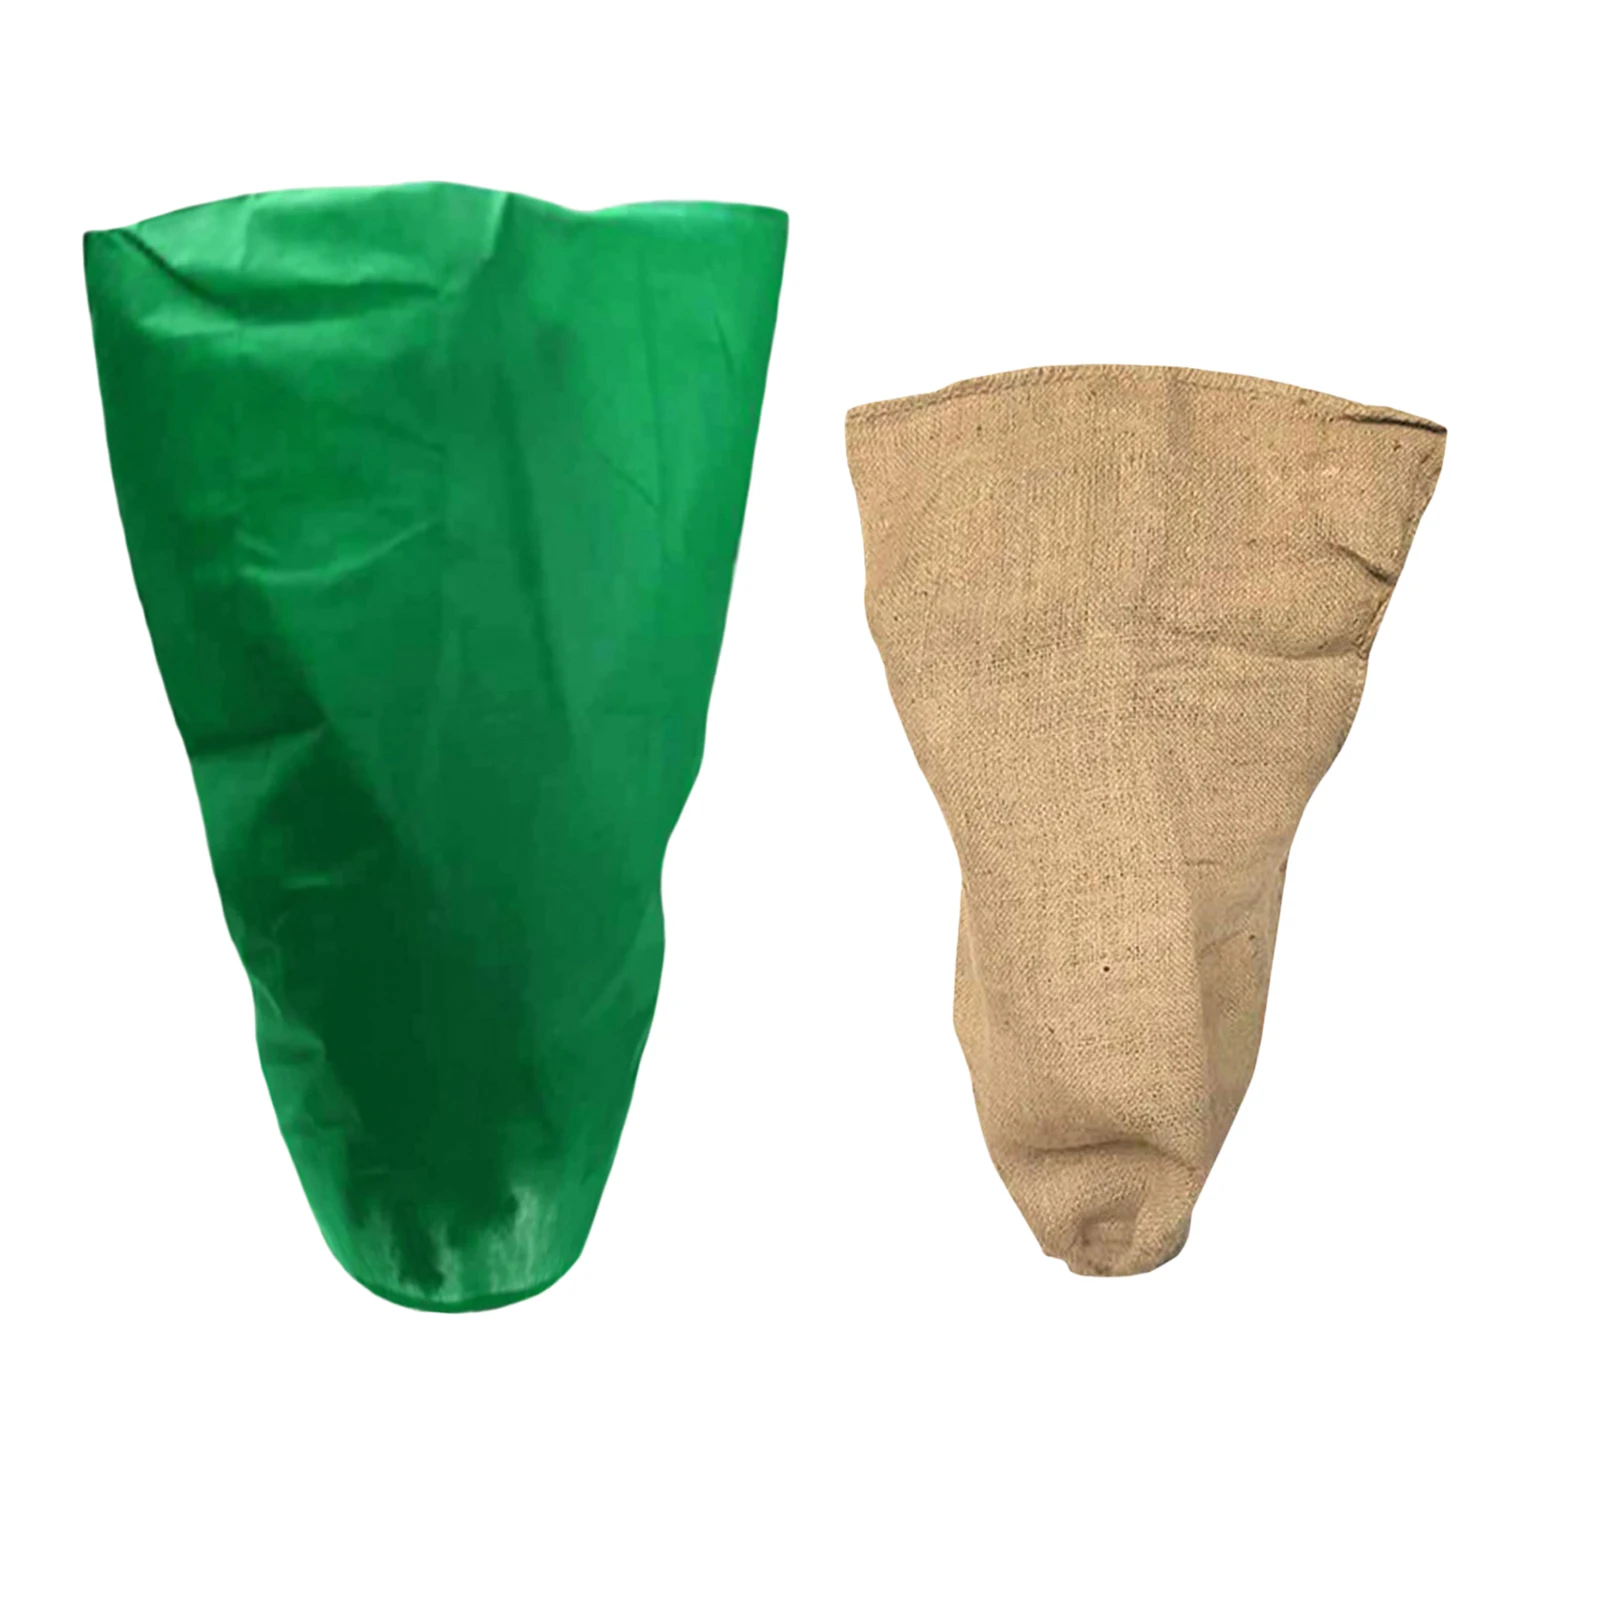 Tree Protection Drawstring Bags Indoor & Outdoor Plant Covers for Outdoor Tree Garden Winter